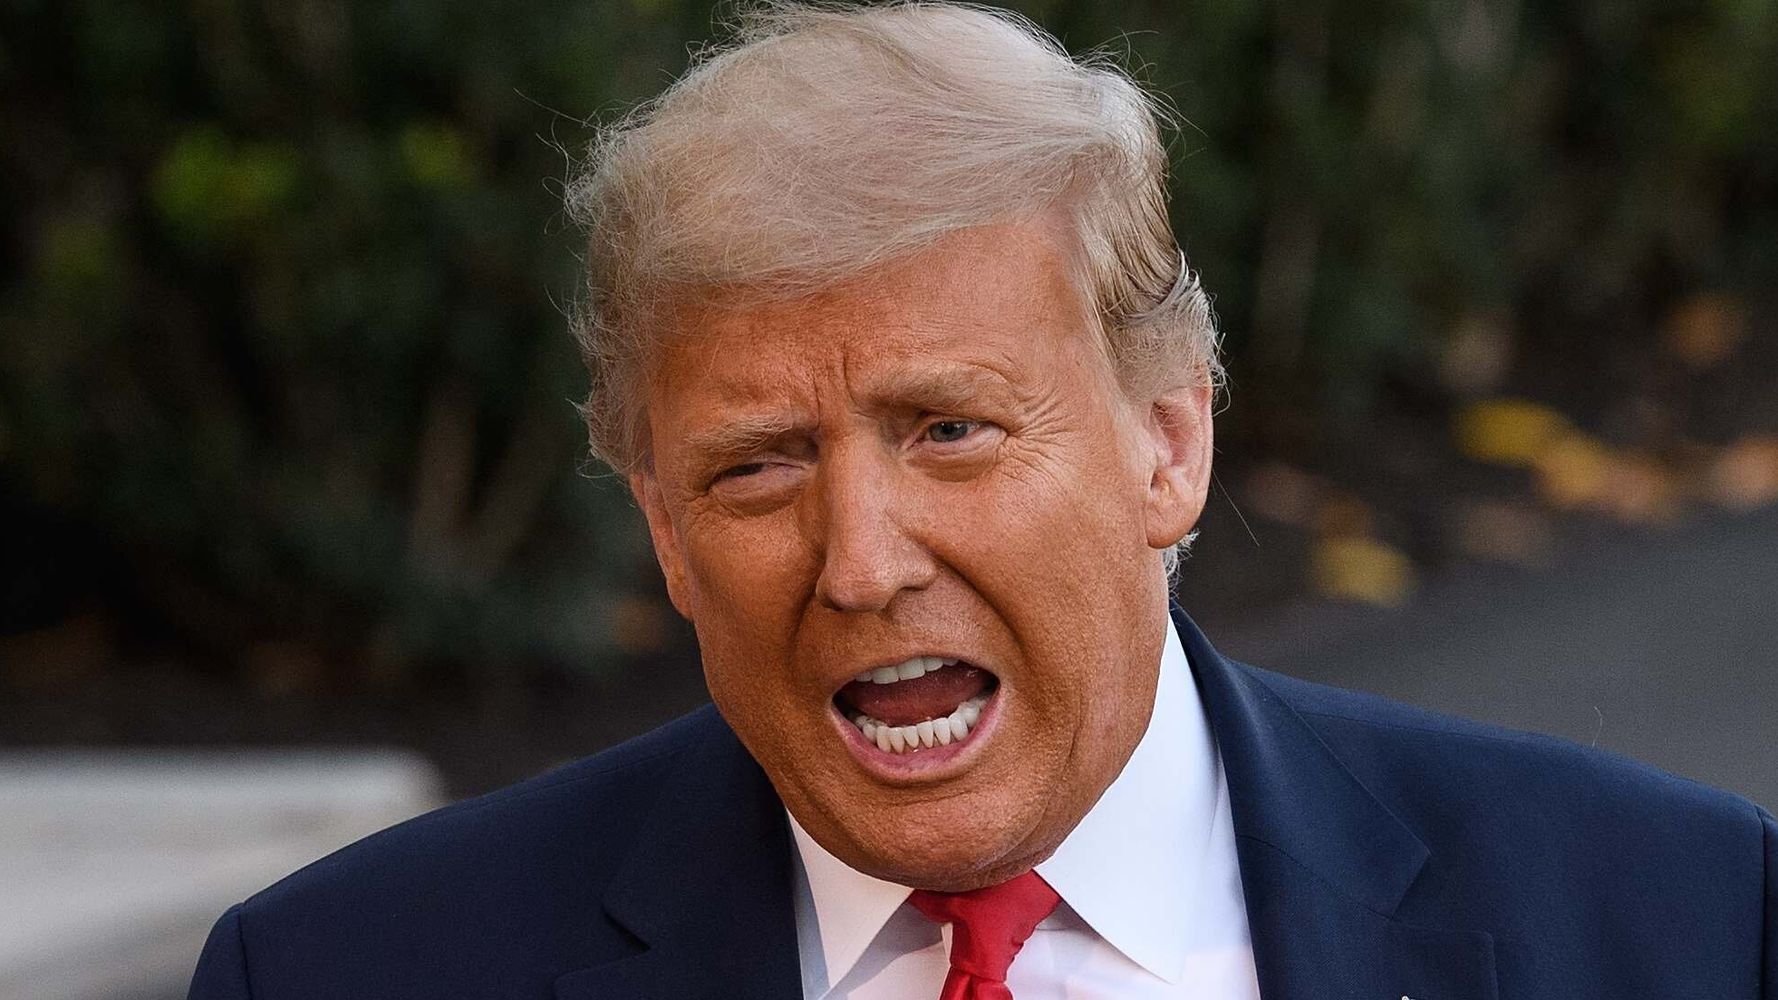 OOPS: Trump’s New Attorney Admits Biden Won, Says Lawsuits ‘Will Not Work’